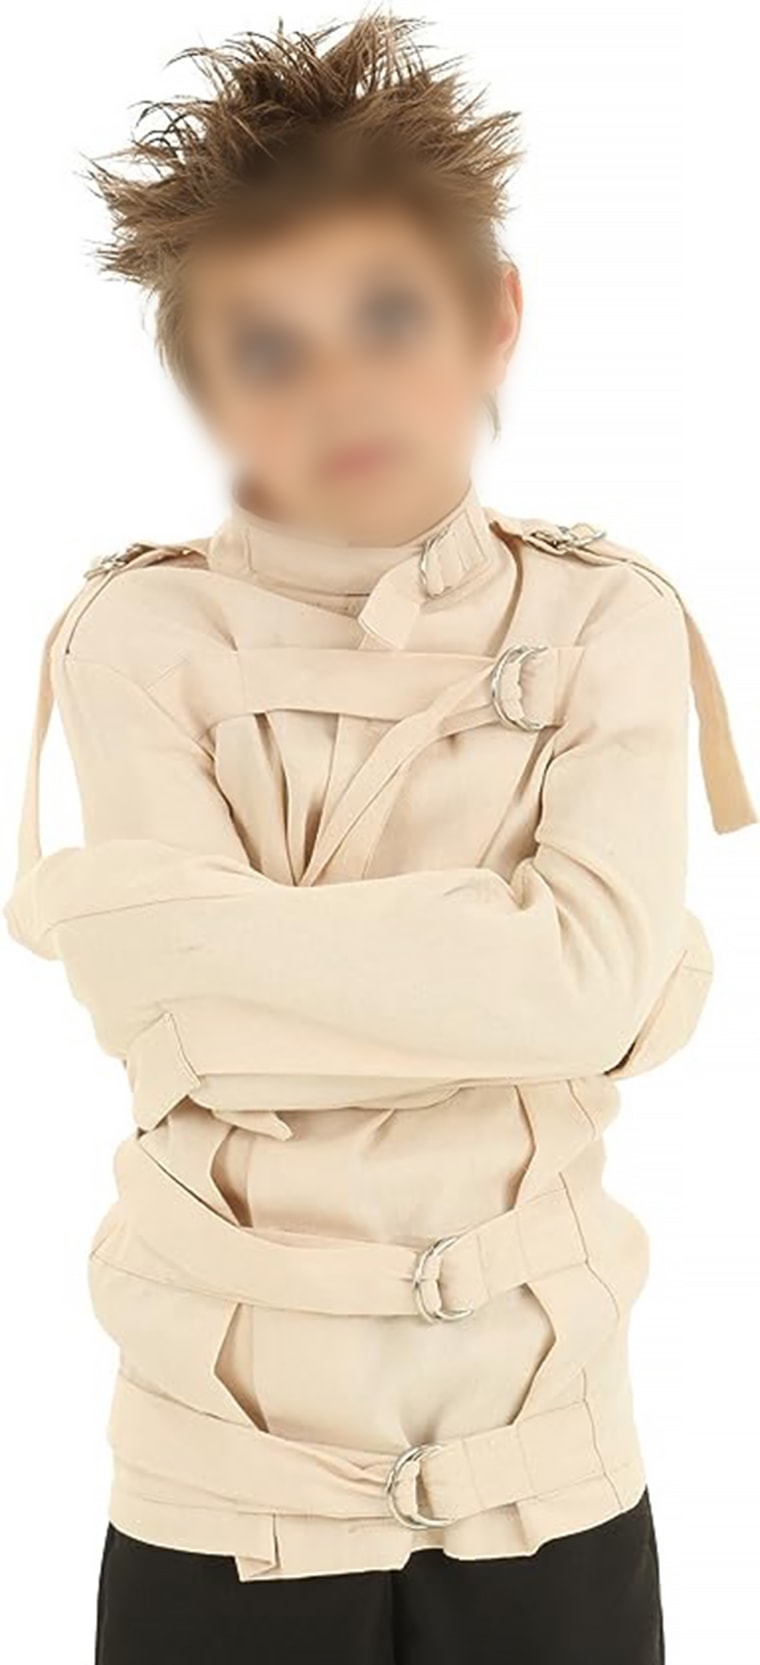 "Straight Jacket Costume for Kids"